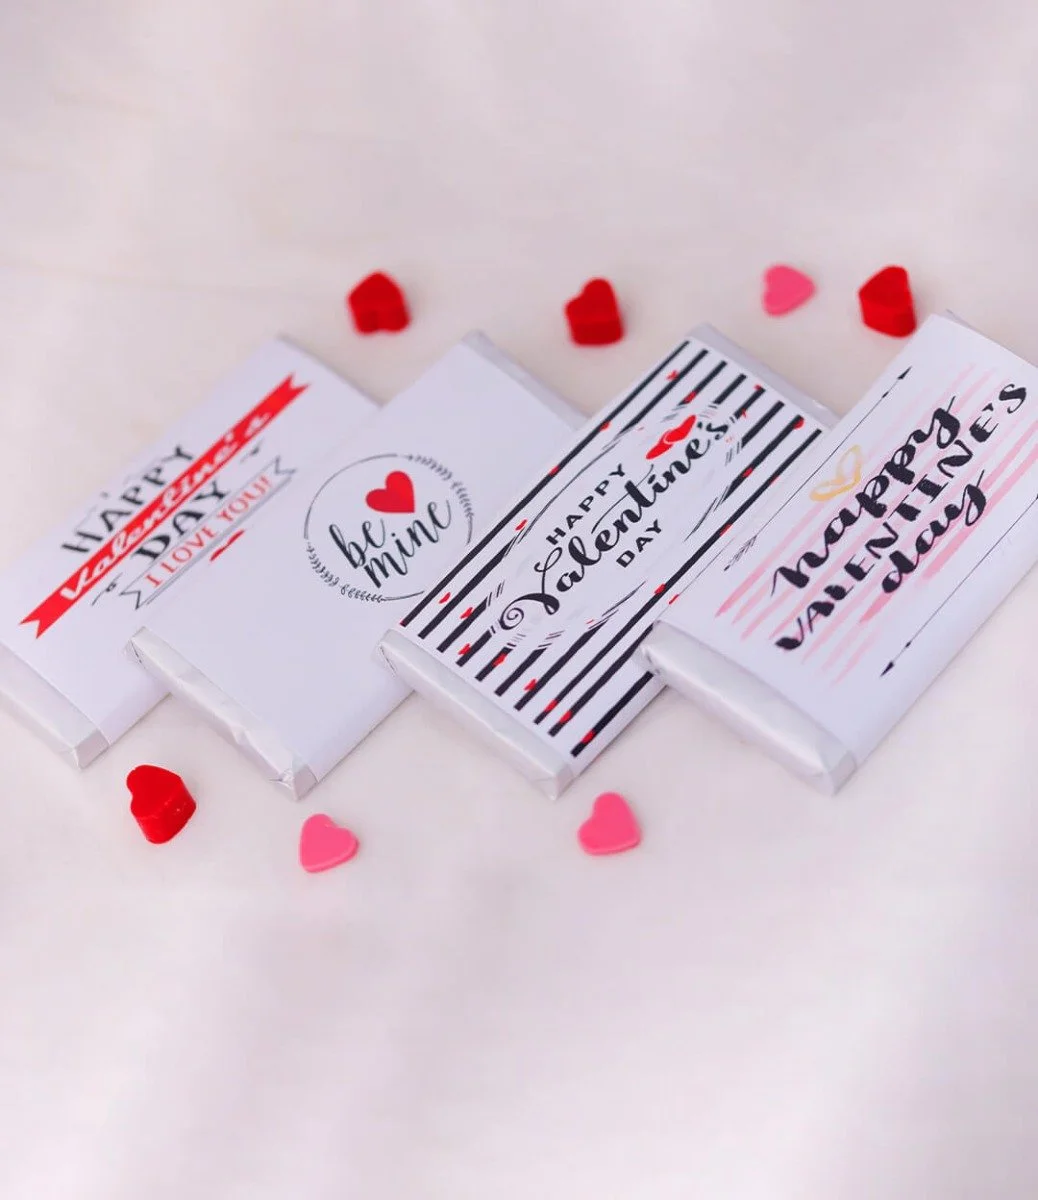 Valentine's Greeting Chocolate Bars by NJD